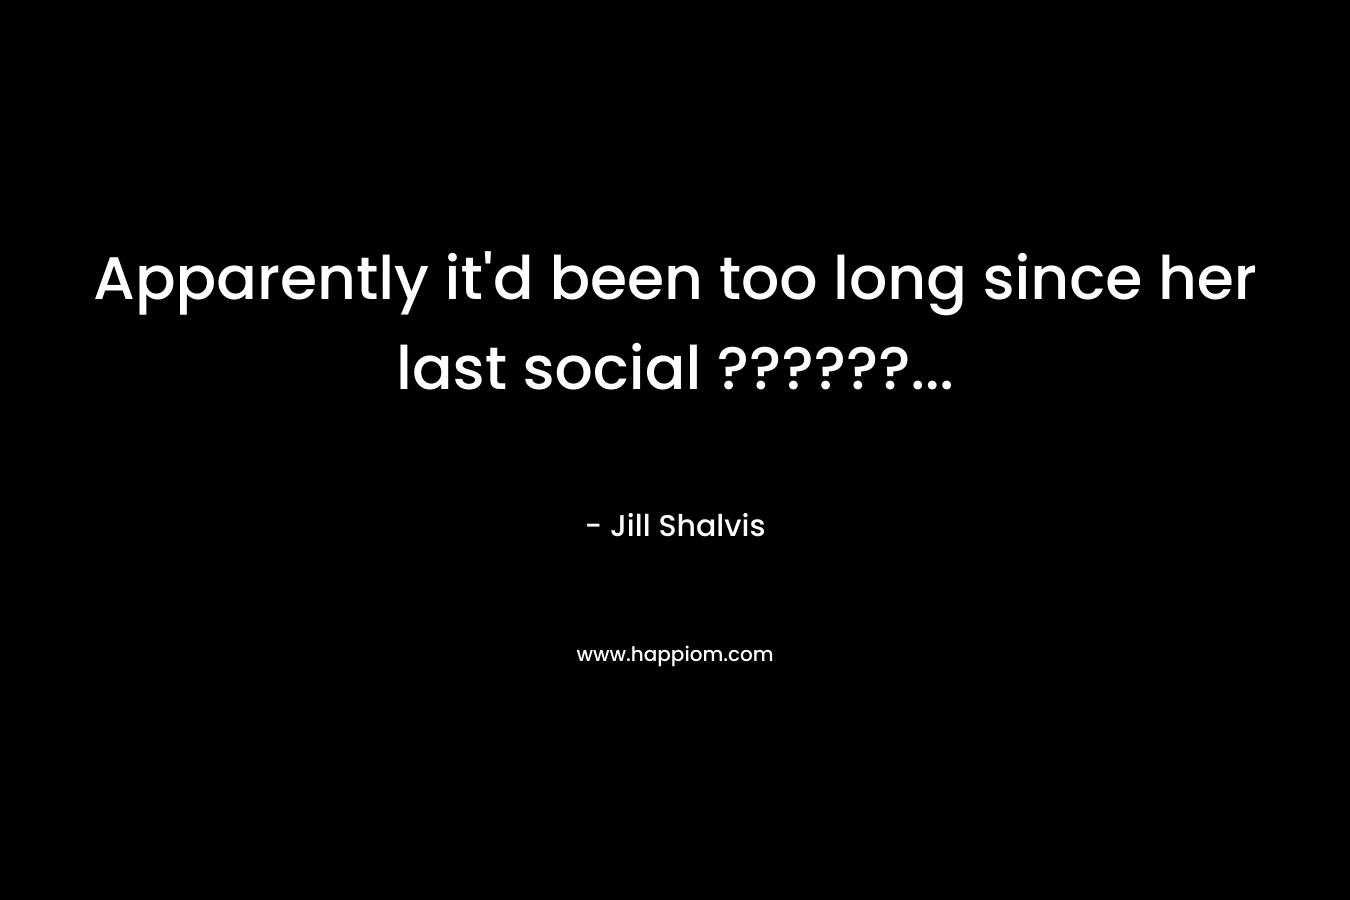 Apparently it'd been too long since her last social ??????...